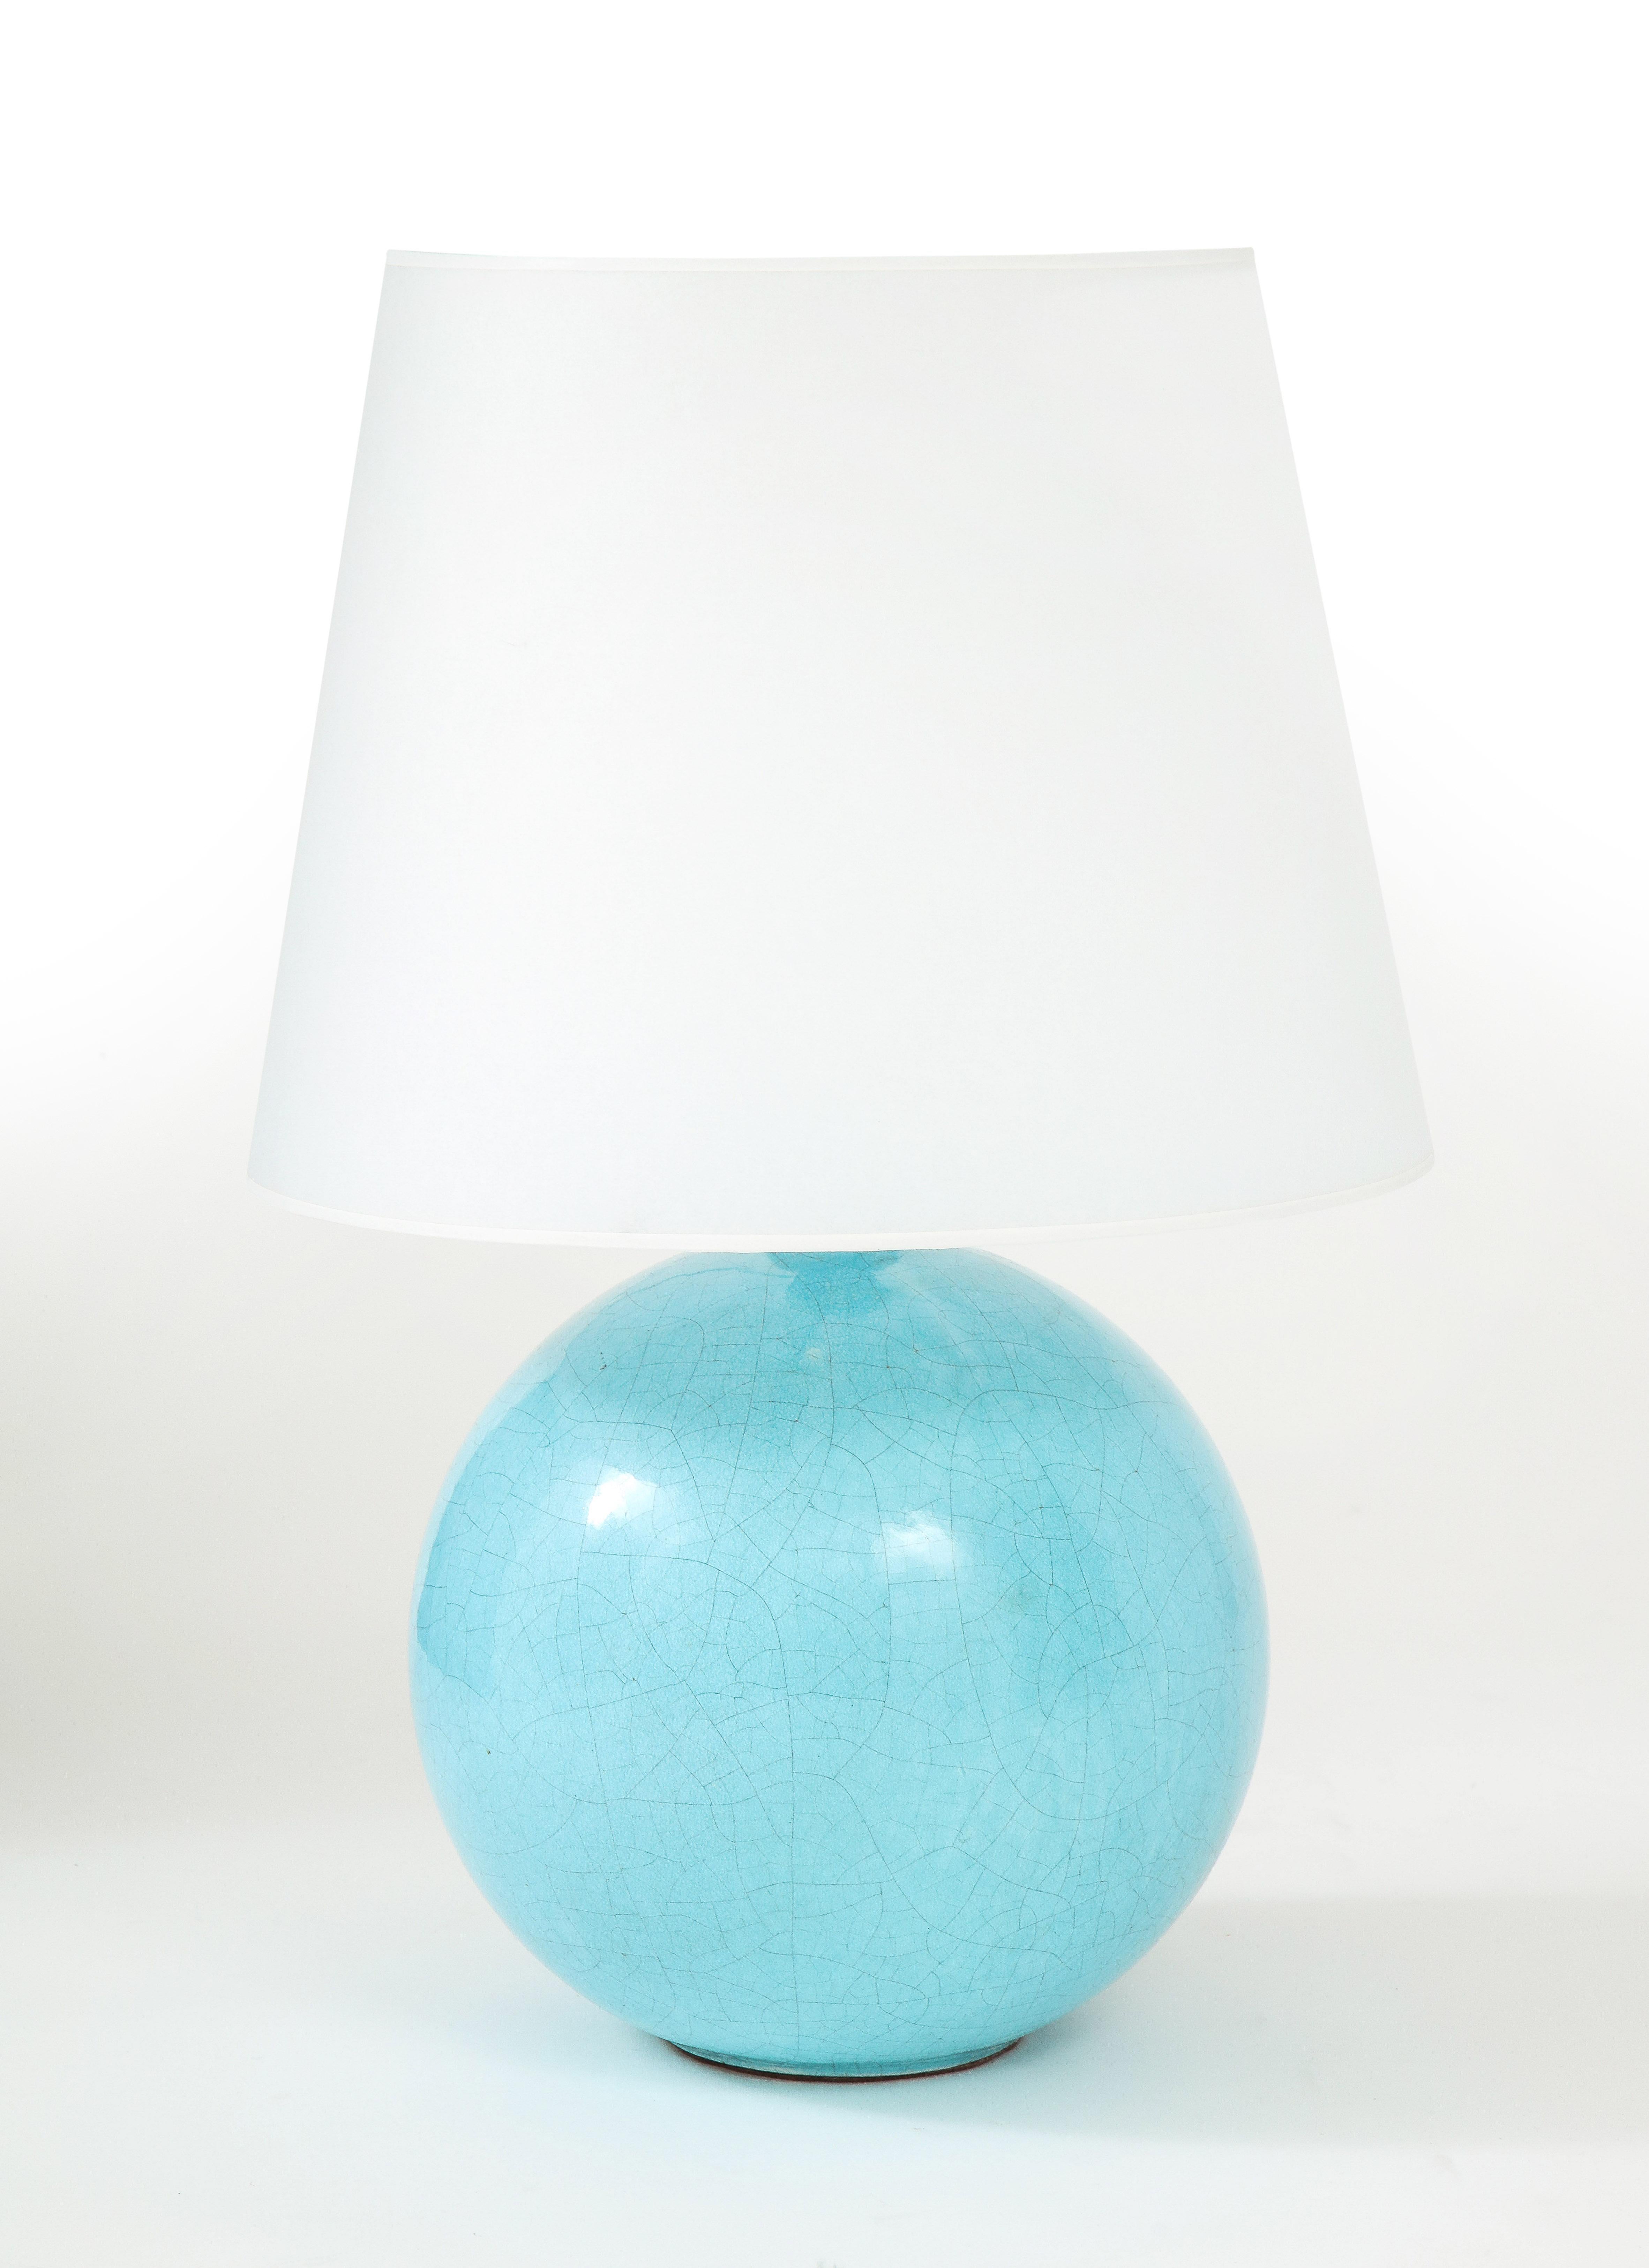 French Azure Blue Cracqueleur Glaze Lamp with Custom Made Vellum Shade, Silk twist cord/switch, France, c .1930-45
Ceramic
H: 22,  Vessel: H: 10 at Diam. 10 (at widest) in.  Bottom of Shade: 14 in.